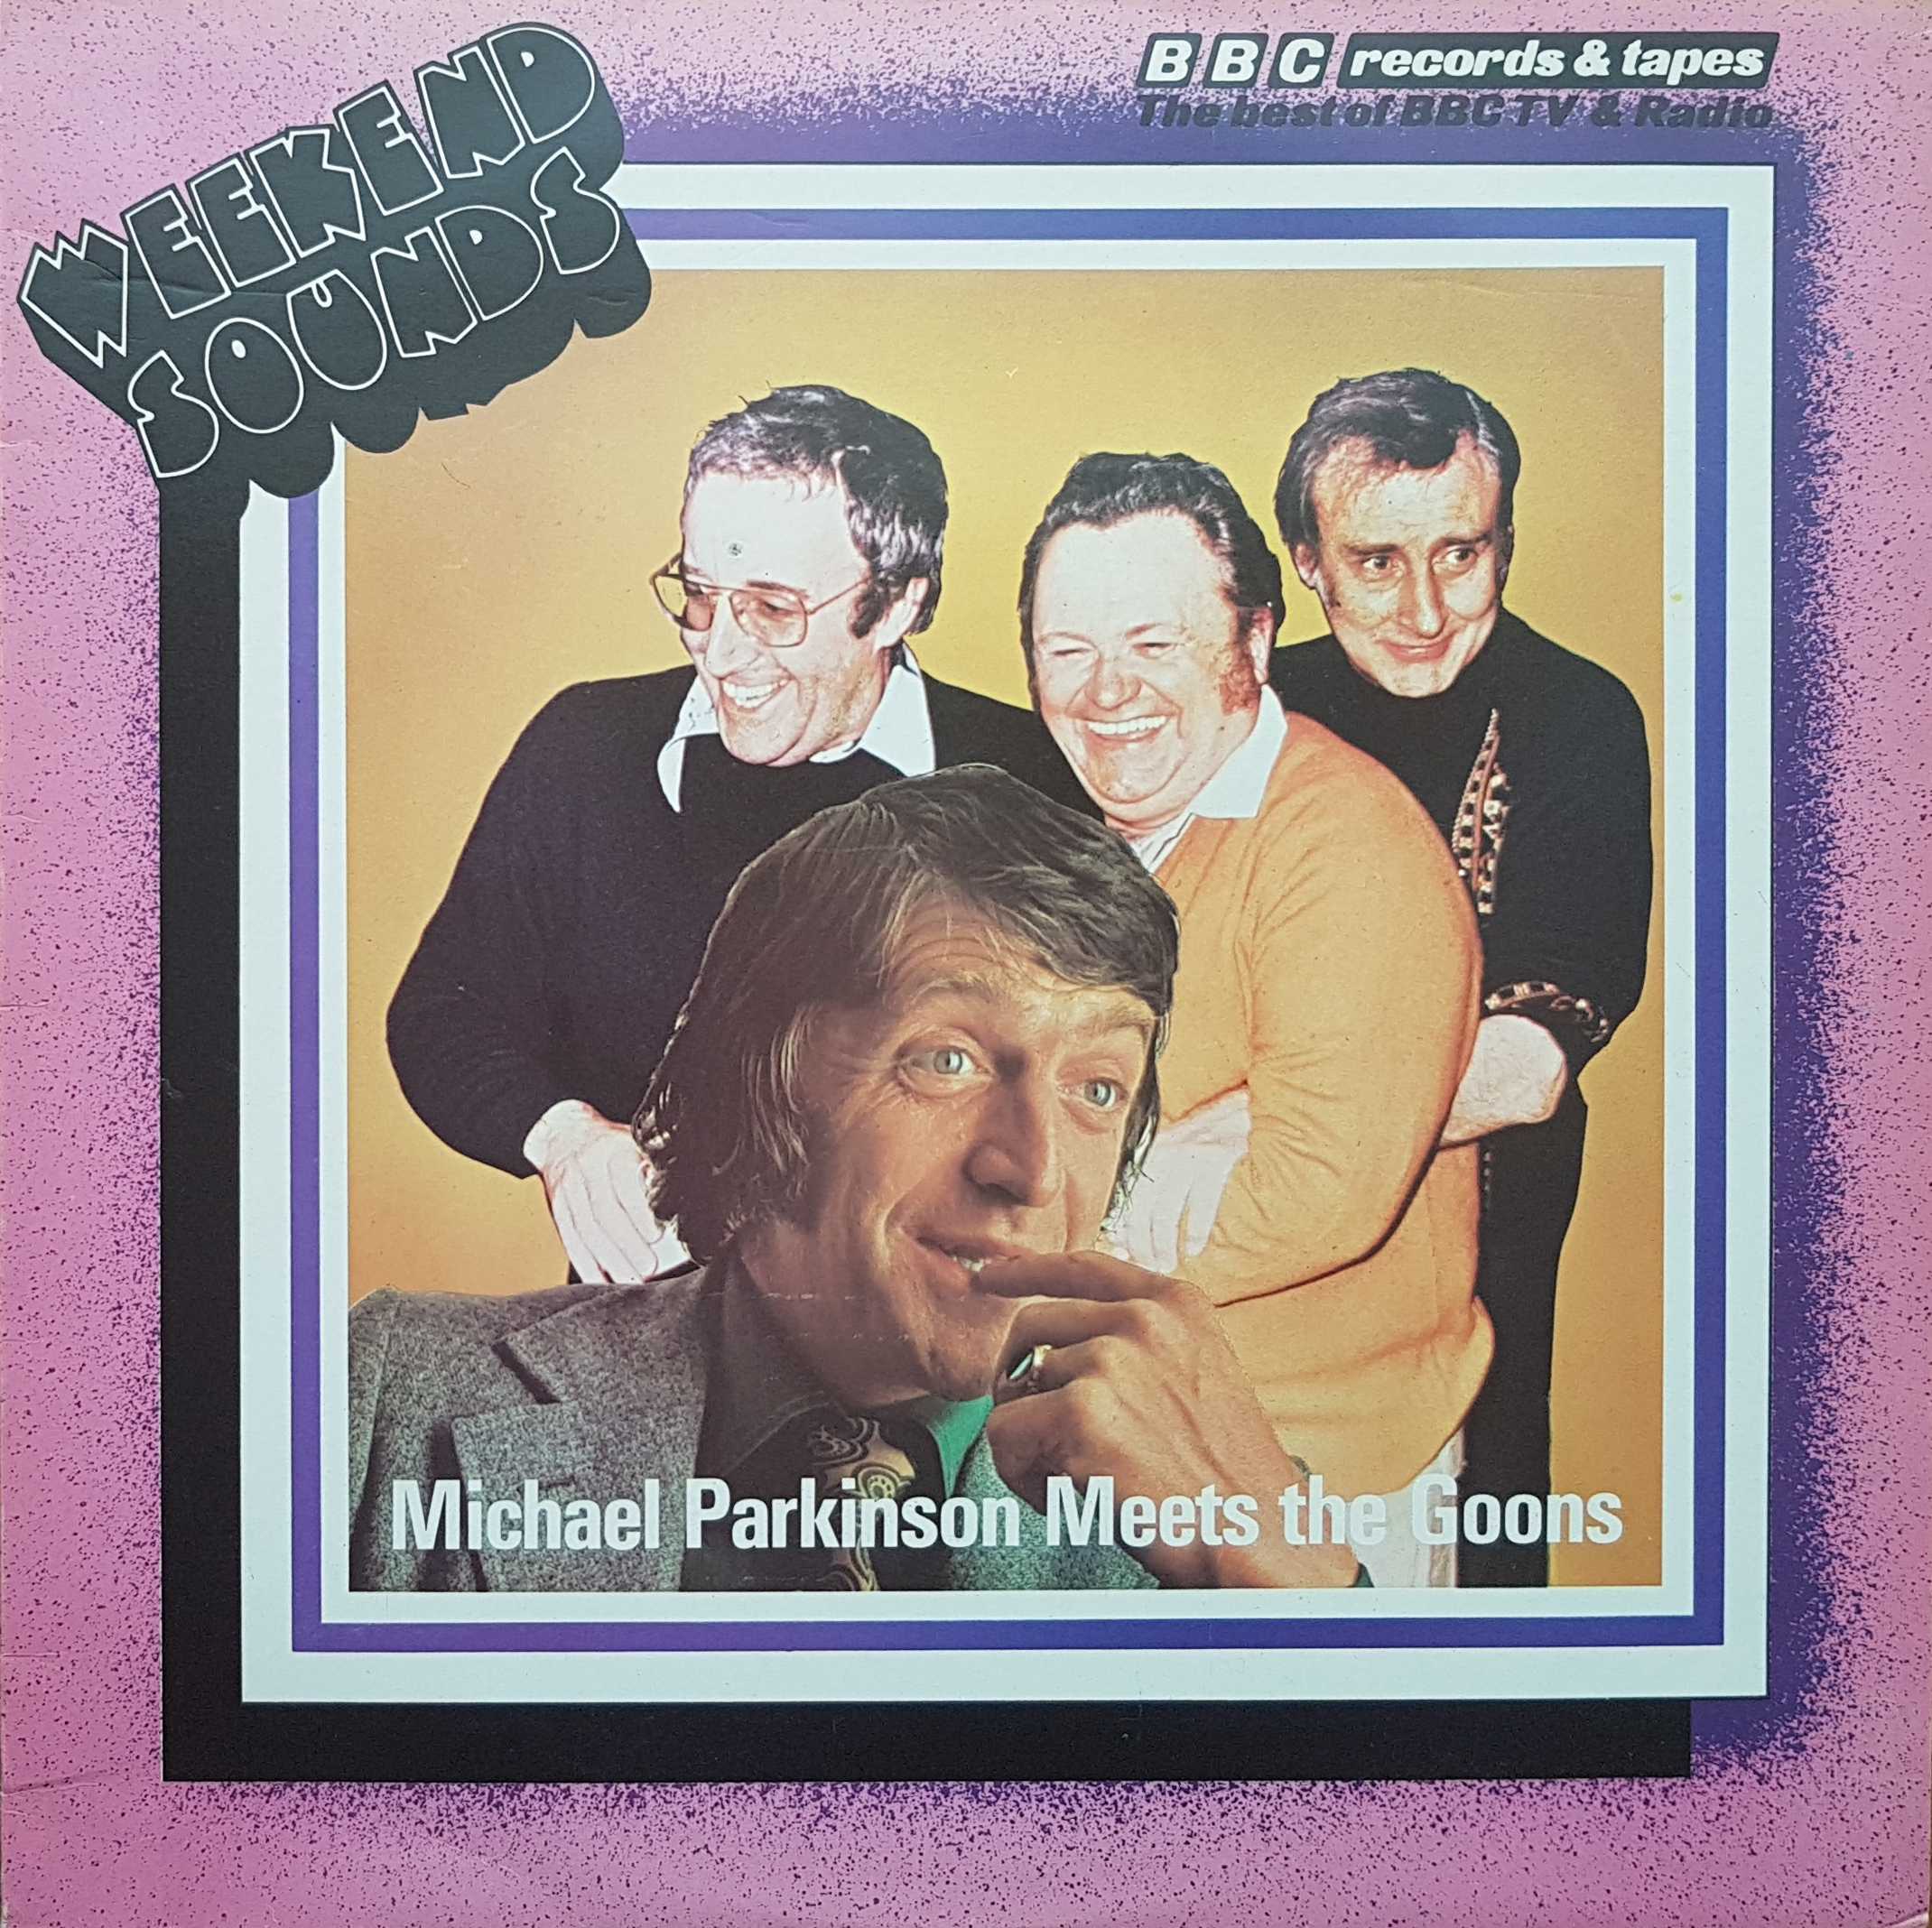 Picture of REC 259 Parkinson meets the Goons by artist Michael Parkinson from the BBC albums - Records and Tapes library